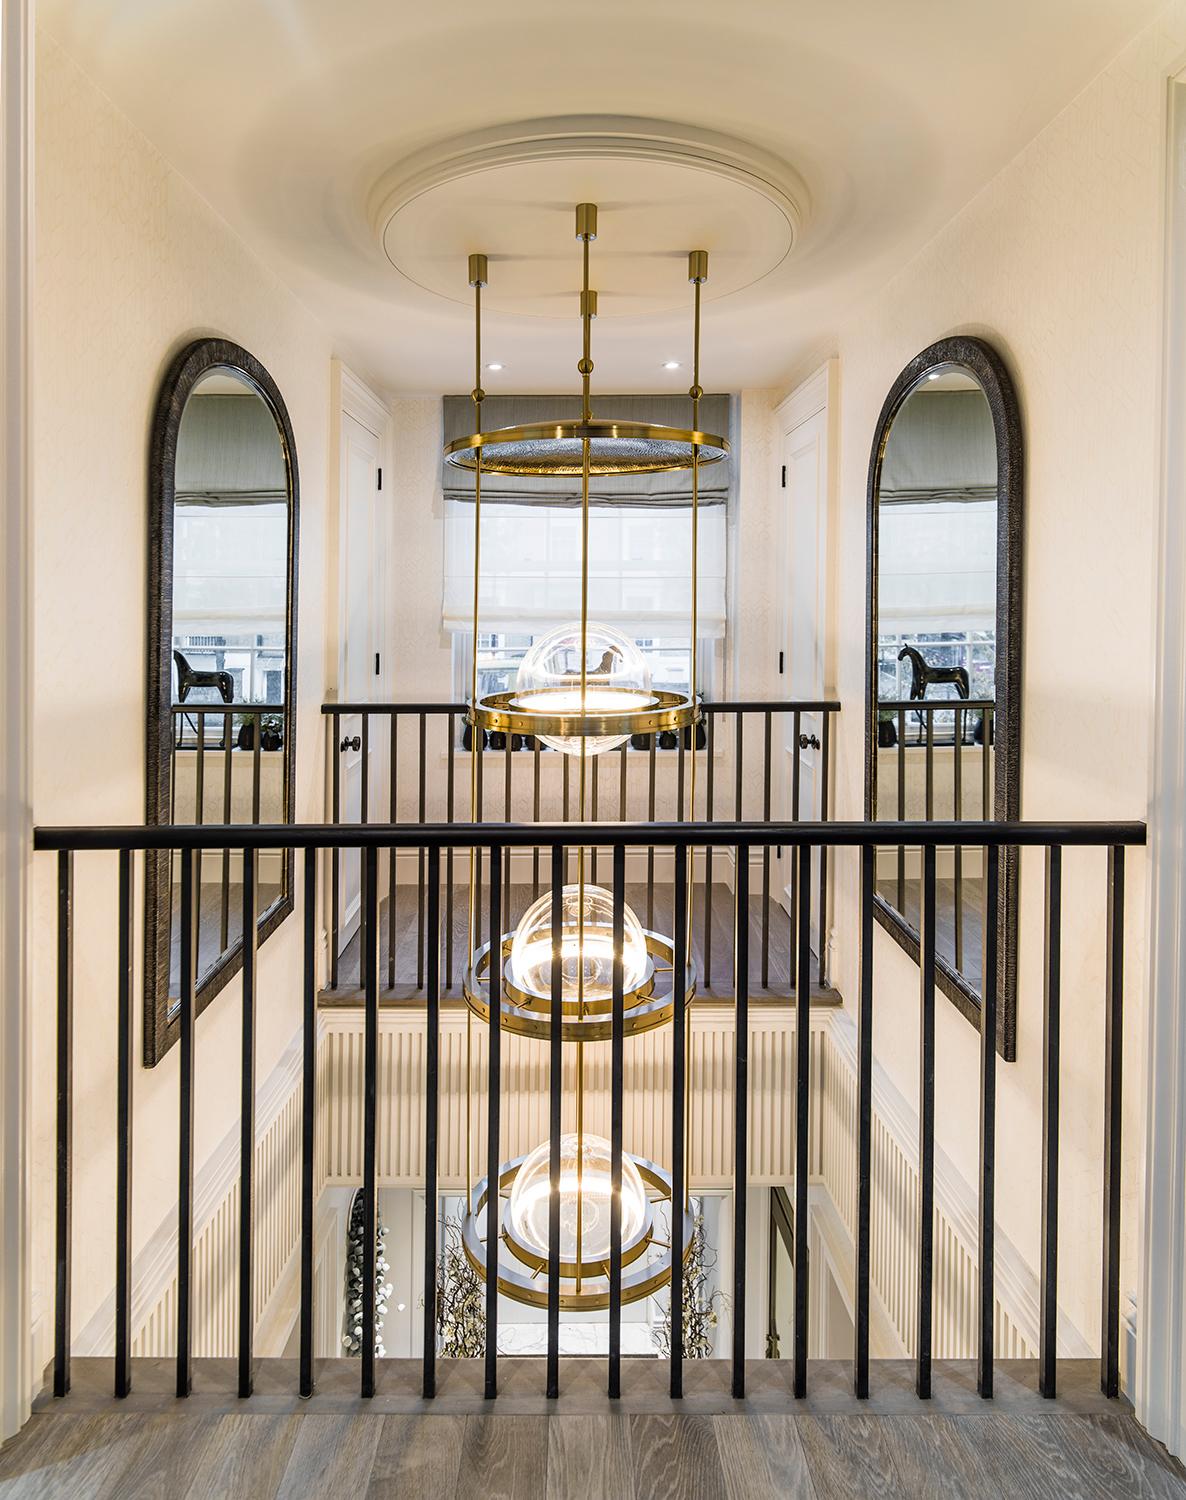 Miessa is a contemporary chandelier with the presence to be a centrepiece in any generous, high-ceilinged space, including atriums and stairwells. Light is refracted in the hidden depths of the solid glass spheres and casts a silky sheen in a